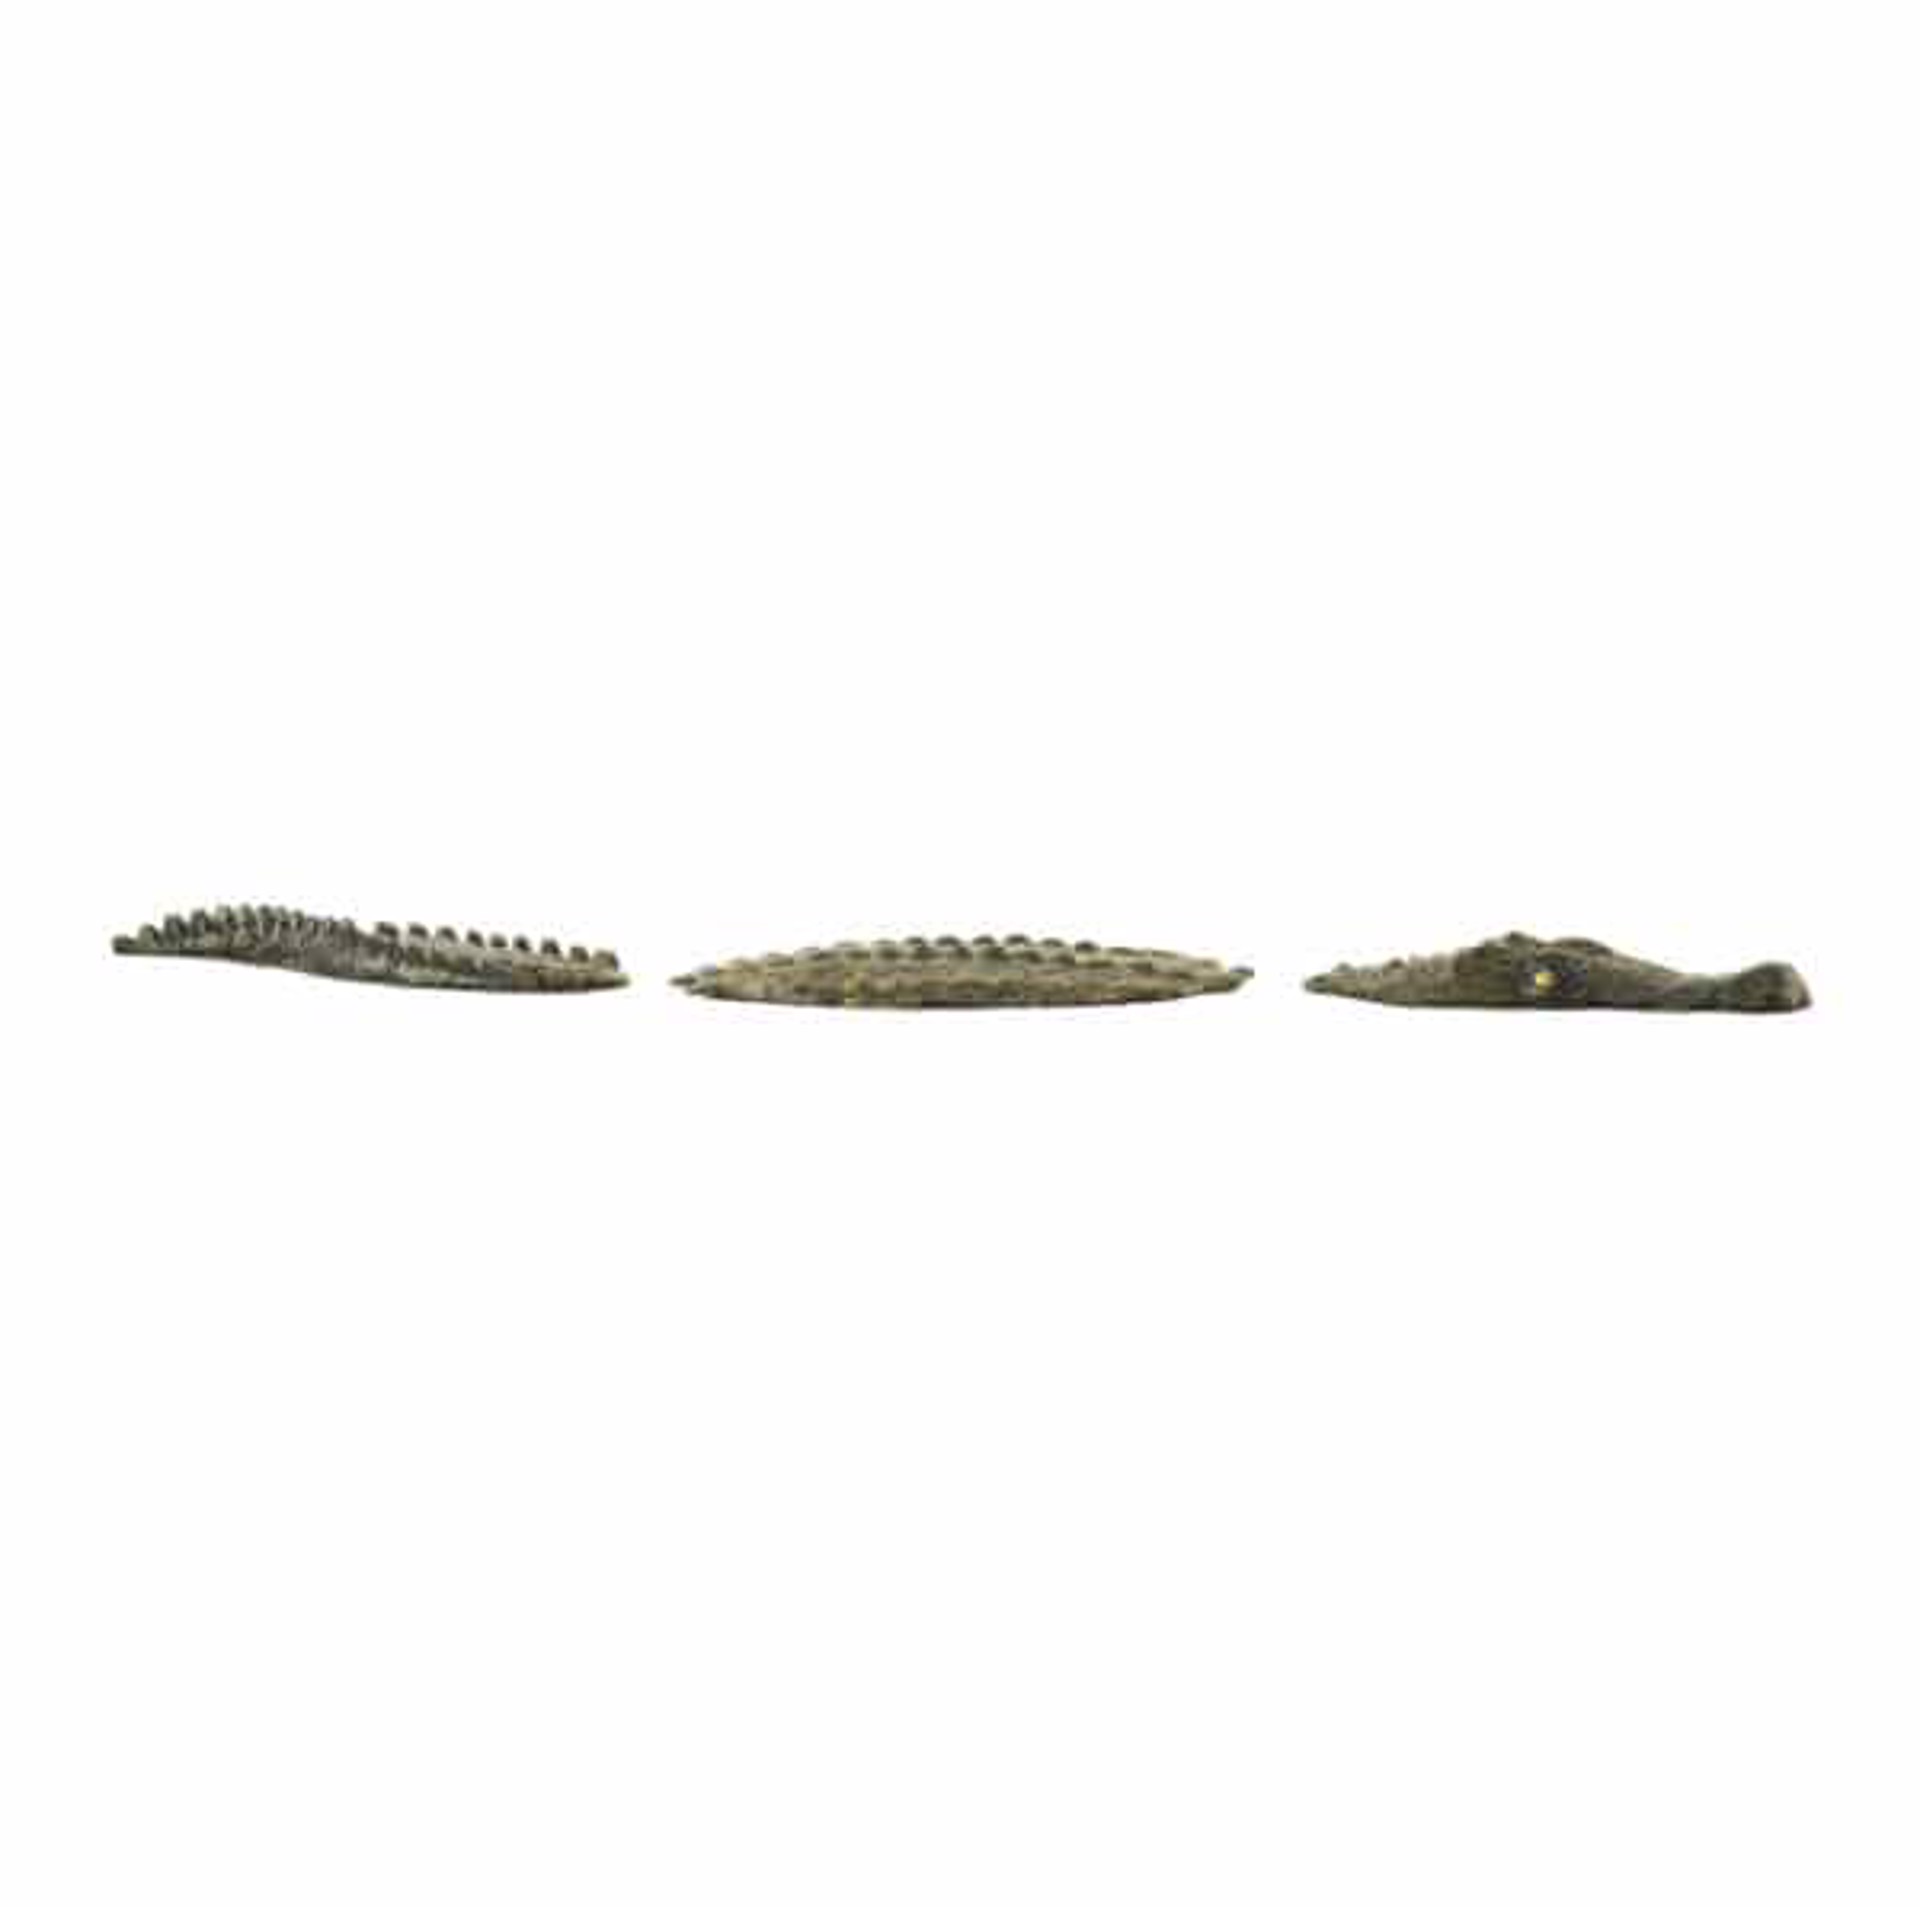 A Three Piece Bronze Crocodile That Rests On A Flat Surface To Appear Submerged, By Rip And Alison Caswell